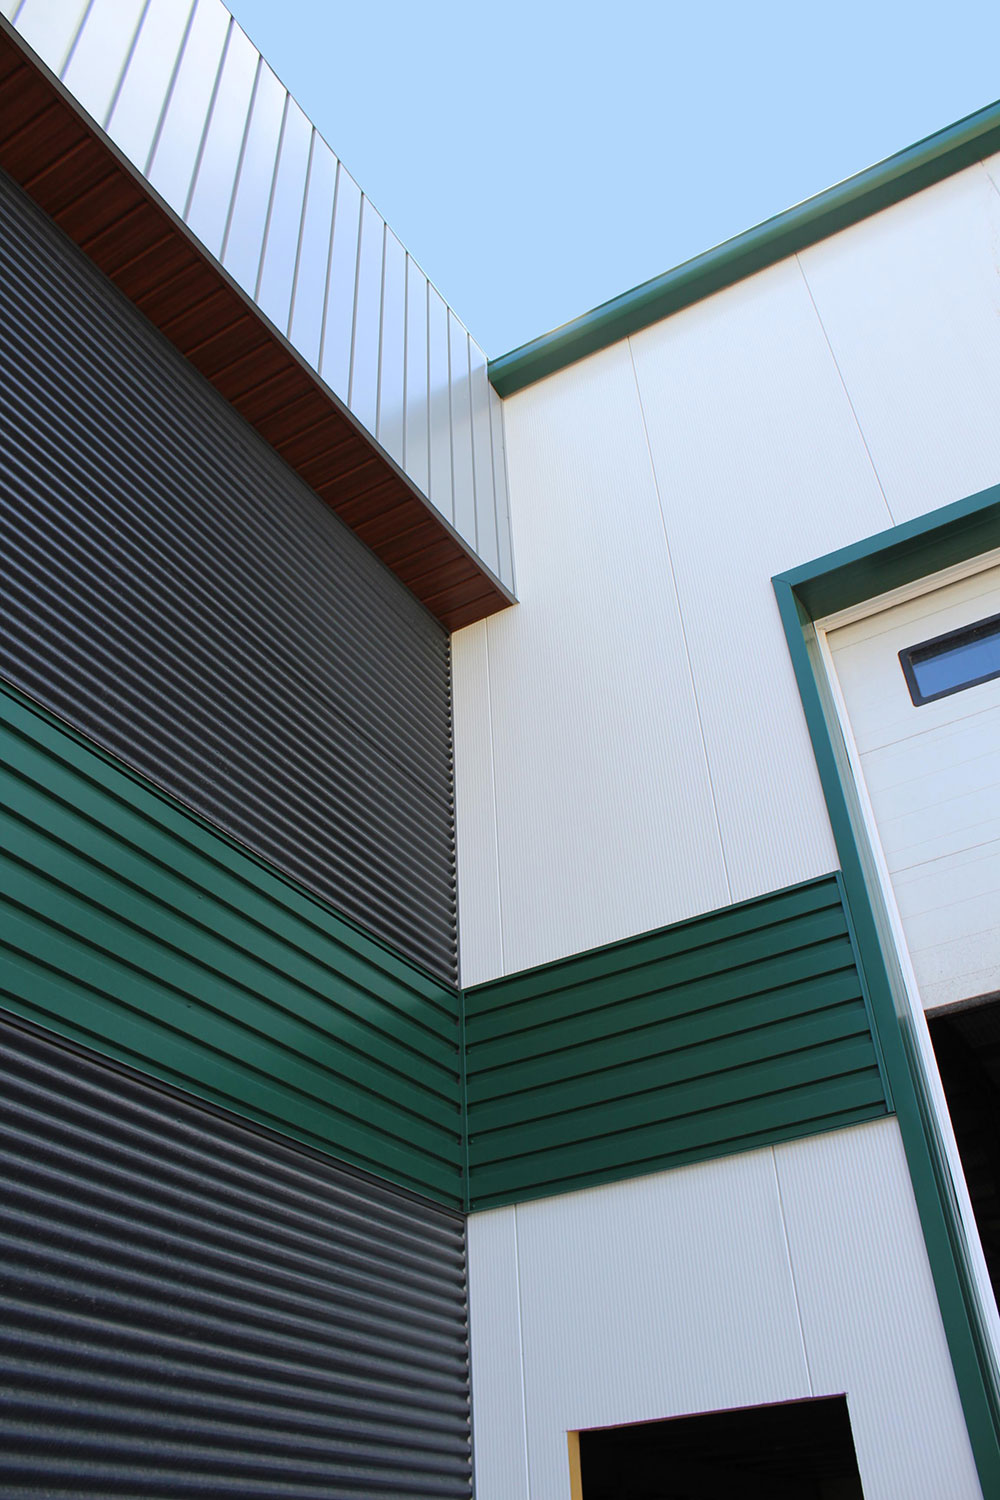 Commercial Building with 7/8 Corrugated in Carbon, Espresso Woodgrain Soffit, and custom panels in Melchers Green and Bright White